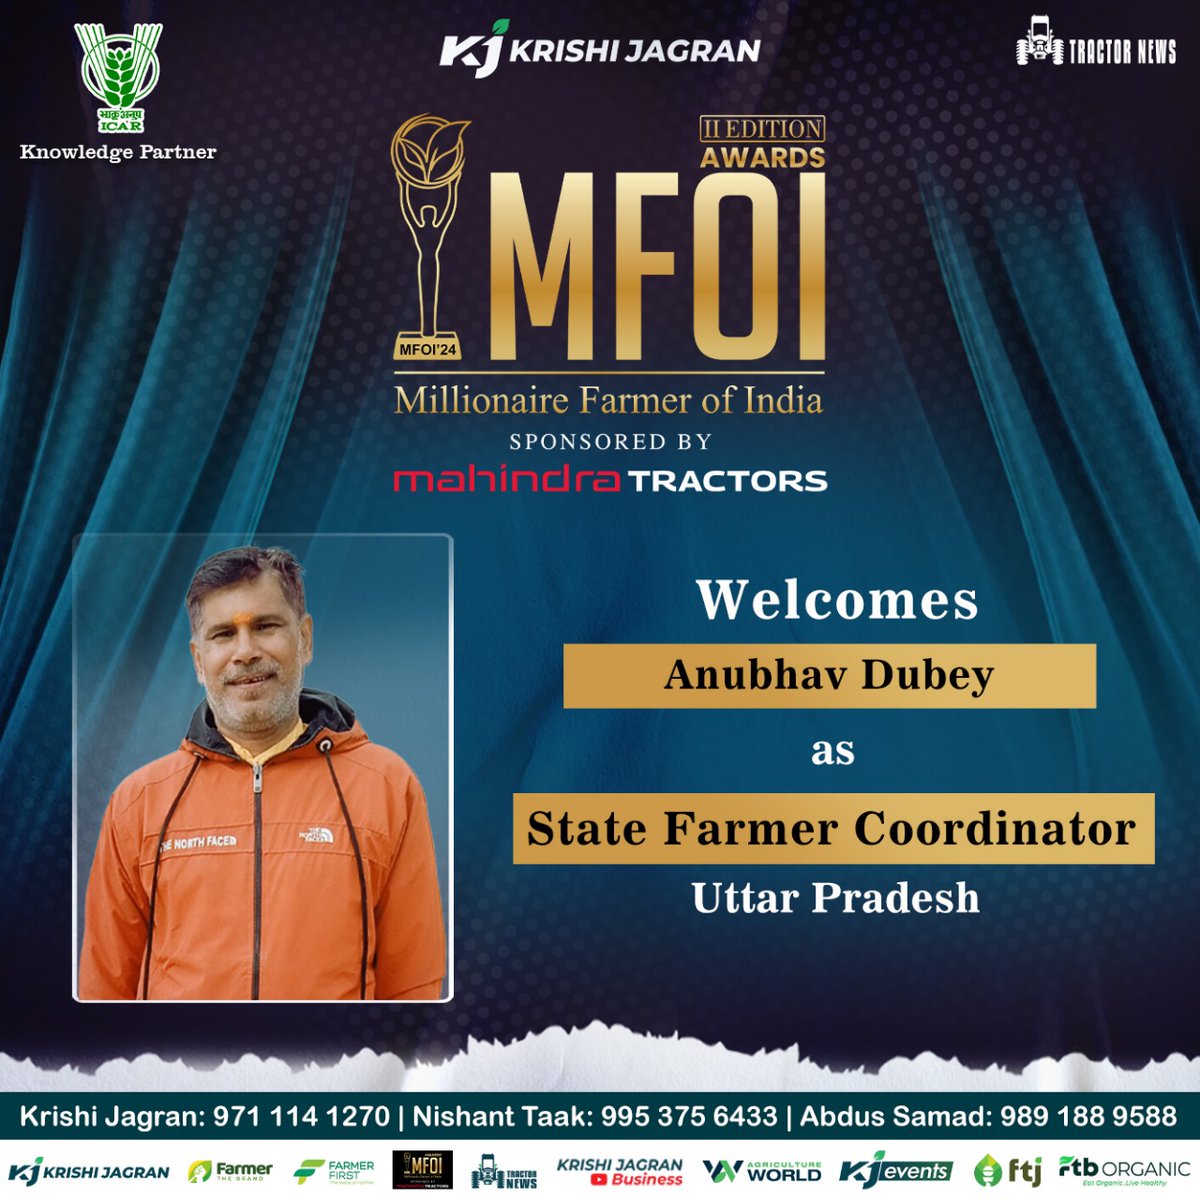 Krishi Jagran is honored to welcome to Mr. Anubhav Dubey who will serve as the State Farmer Coordinator for Uttar Pradesh in the II Edition of the Millionaire Farmer of India, sponsored by Mahindra Tractors. Click on the following link for Registration millionairefarmer.in/en/nominate-fo…